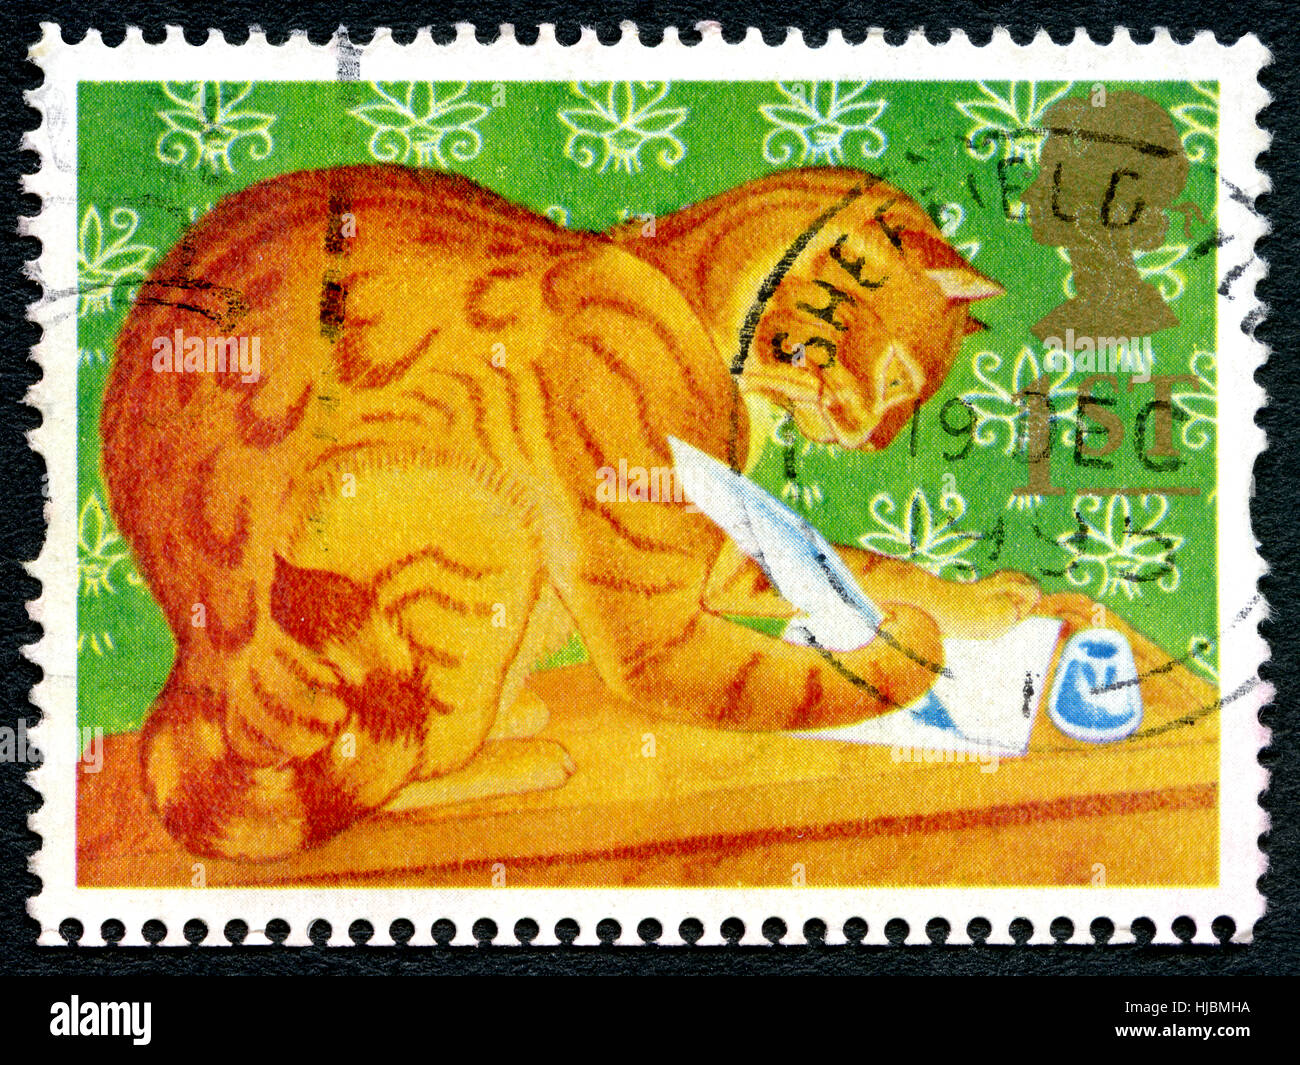 GREAT BRITAIN - CIRCA 1994: A used postage stamp from the UK, depicting an illustration of a Ginger or Marmalade Cat writing a letter, circa 1994. Stock Photo